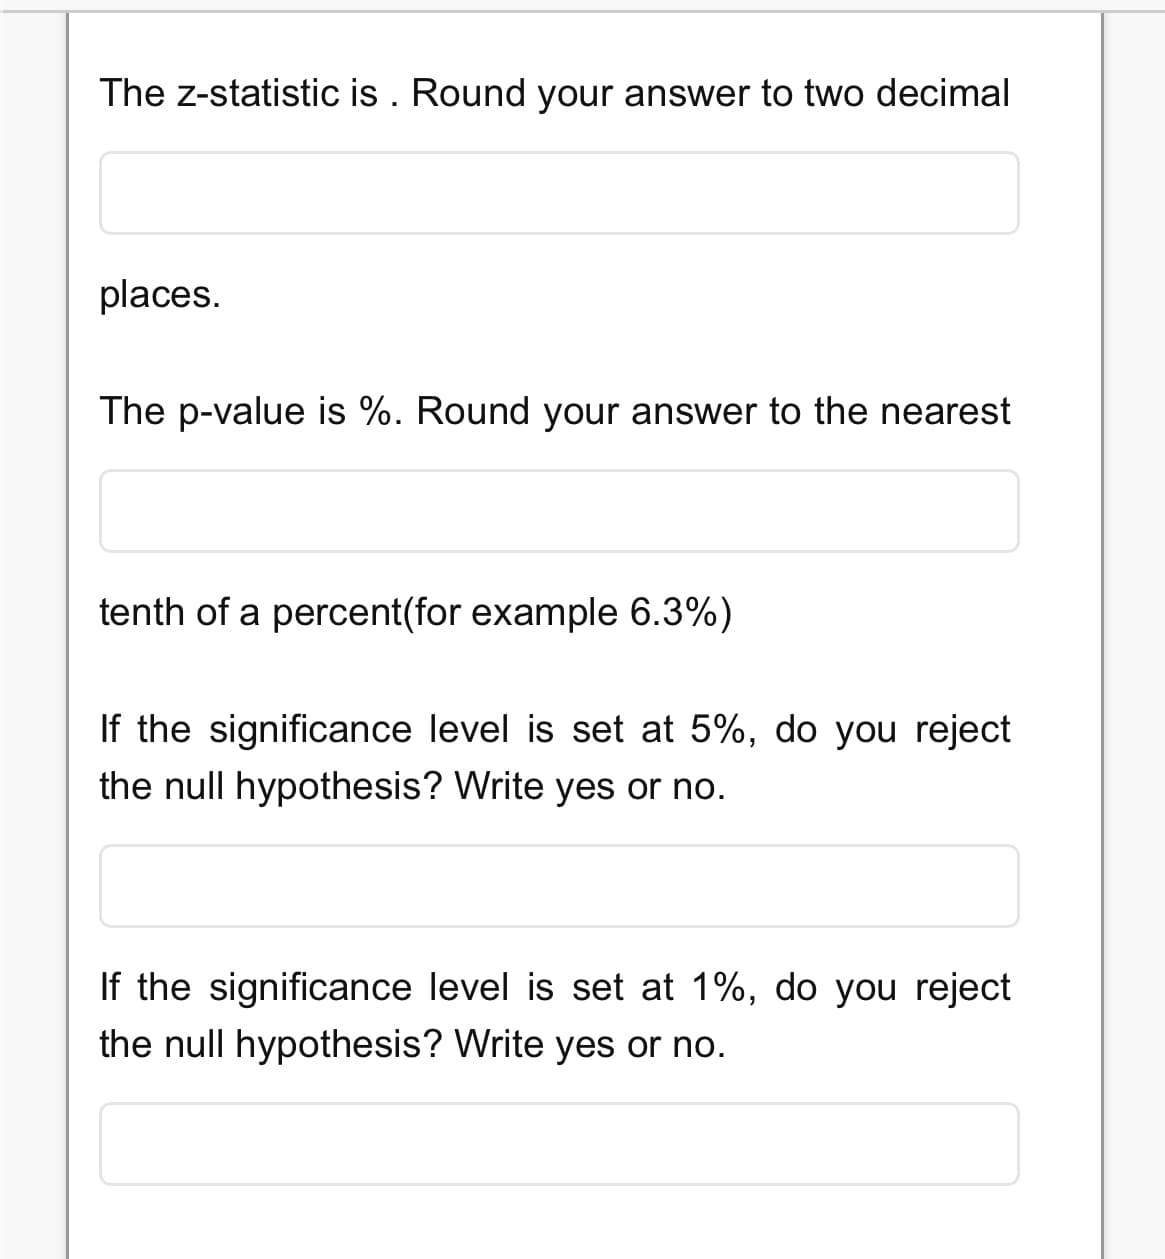 The Z-statistic is. Round your answer to two decimal
places.
The p-value is %. Round your answer to the nearest
tenth of a percent(for example 6.3%)
If the significance level is set at 5%, do you reject
the null hypothesis? Write yes or no.
If the significance level is set at 1%, do you reject
the null hypothesis? Write yes or no.